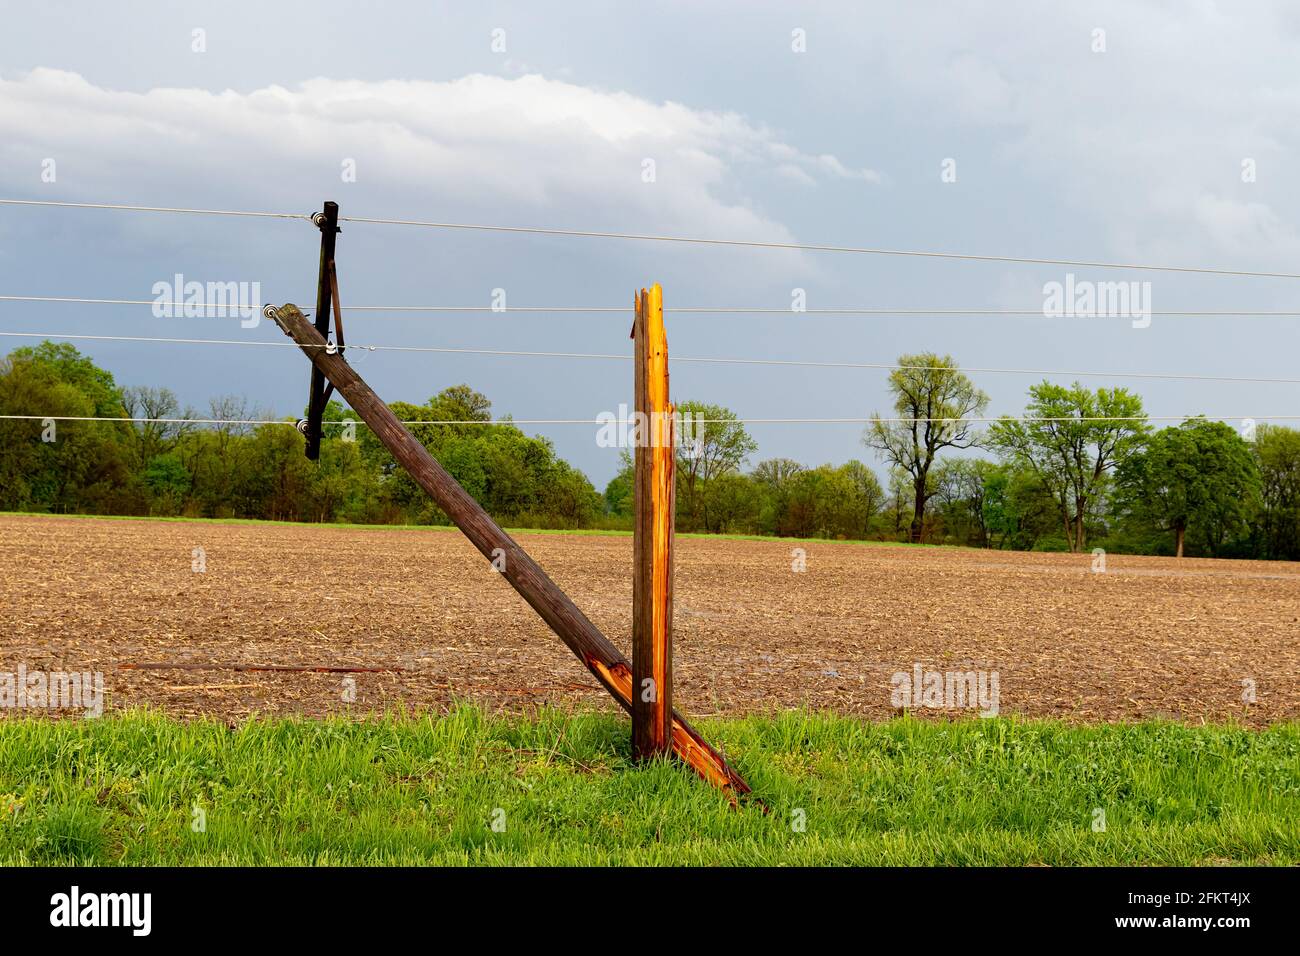 Broken electrical utility pole and power lines due to severe weather. Concept of storm damage, power outage, and electricity danger. Stock Photo